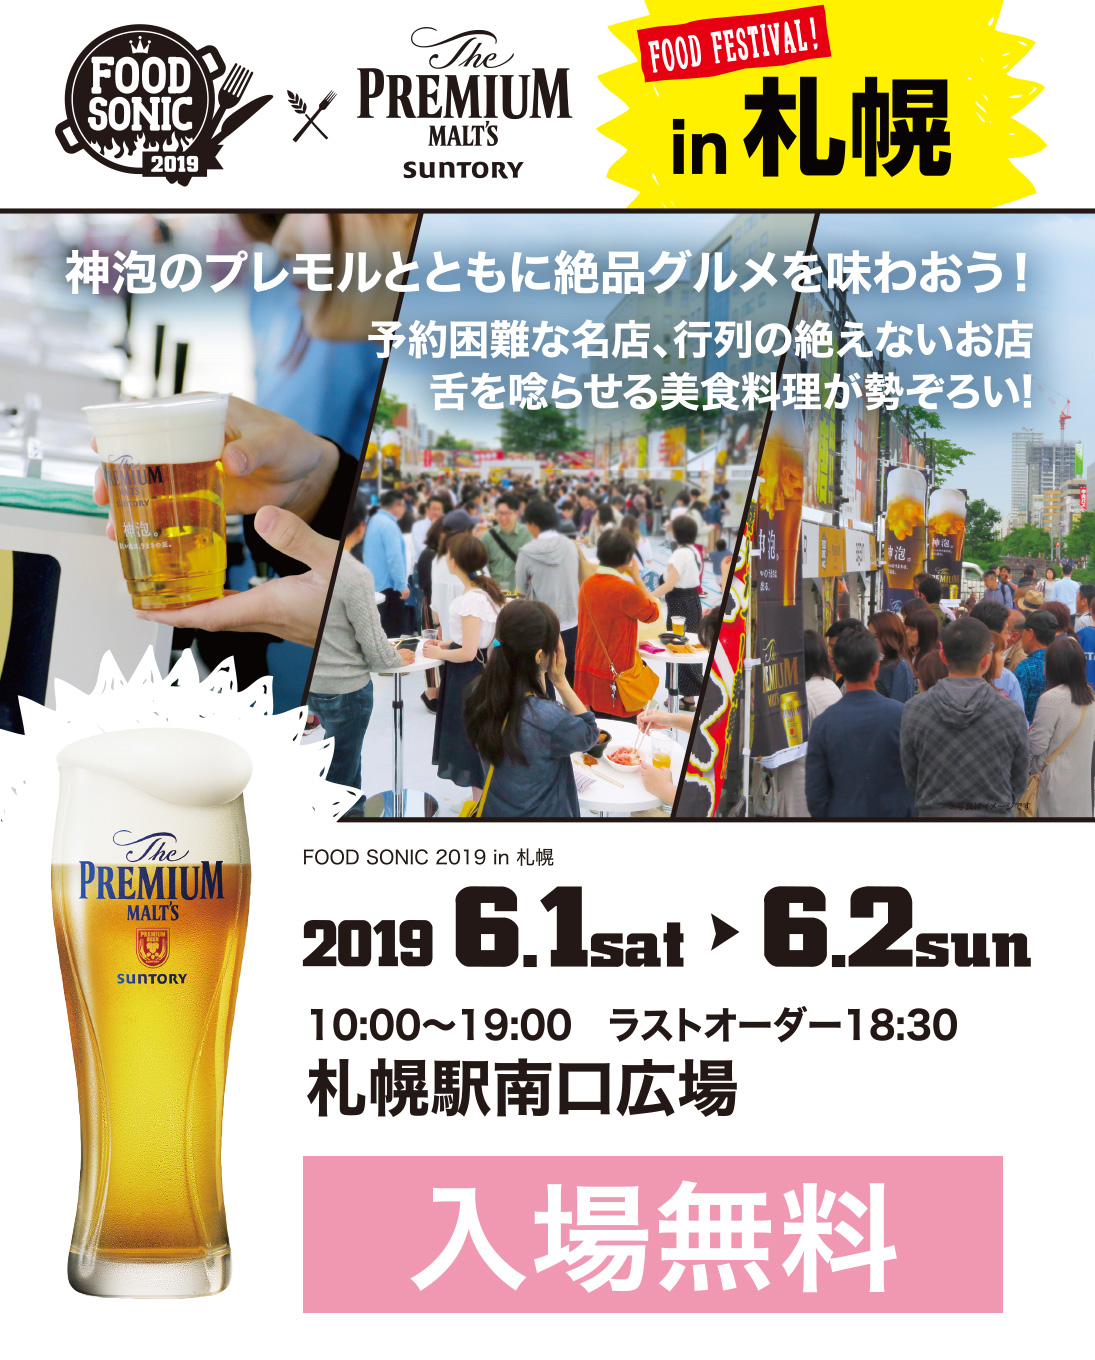 FOOD SONIC 2019 in 札幌 Supported by SUNTORY